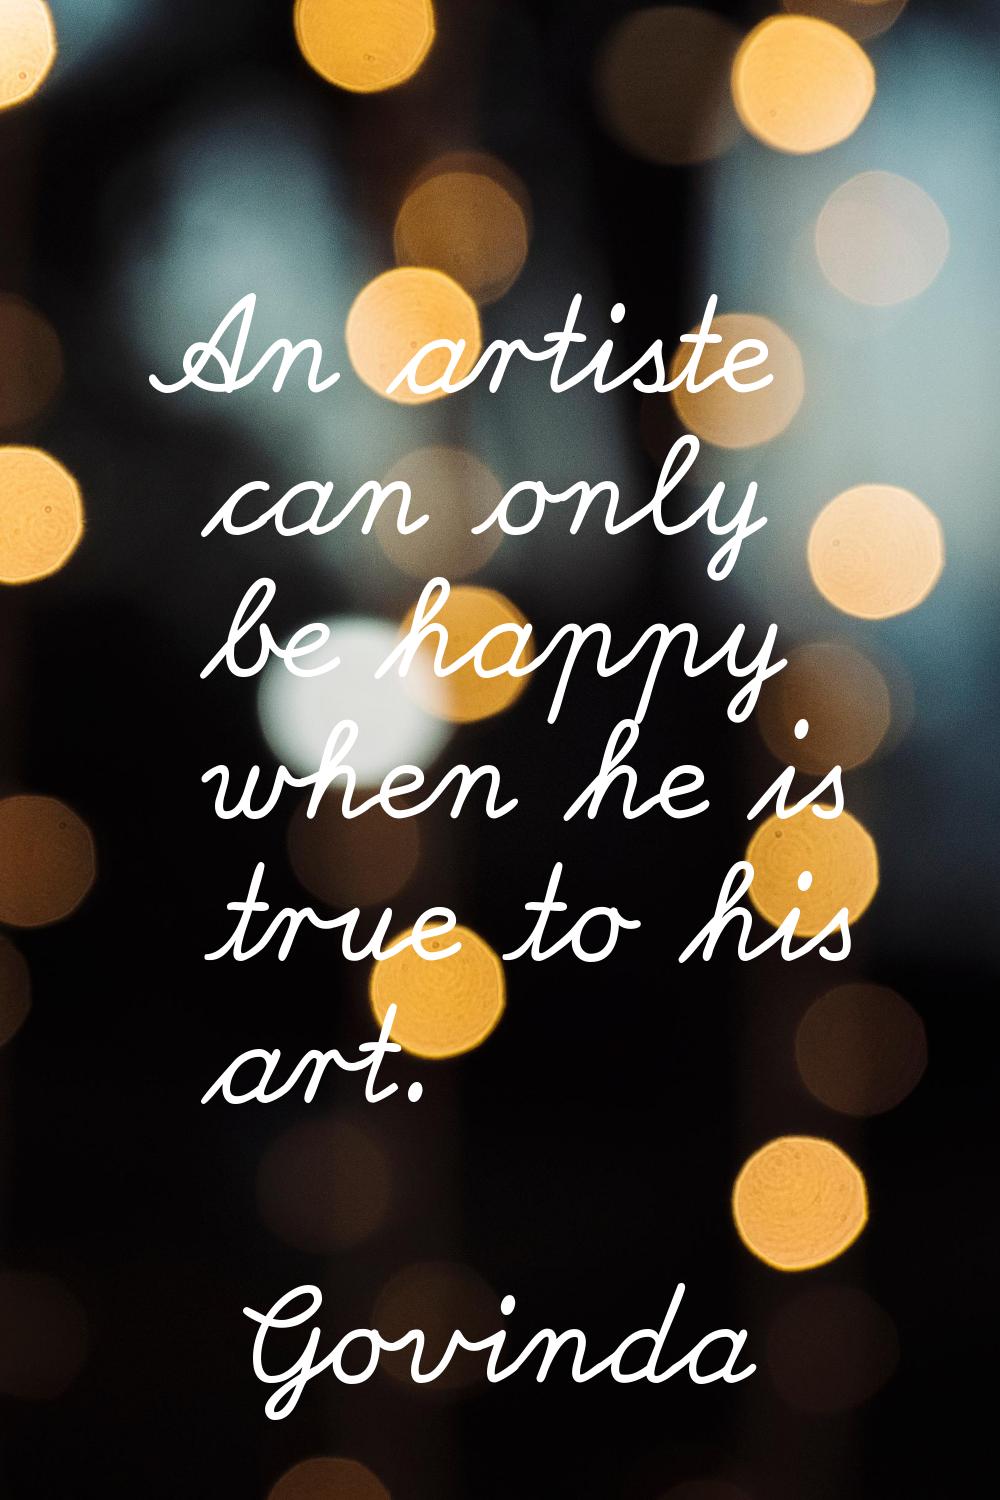 An artiste can only be happy when he is true to his art.